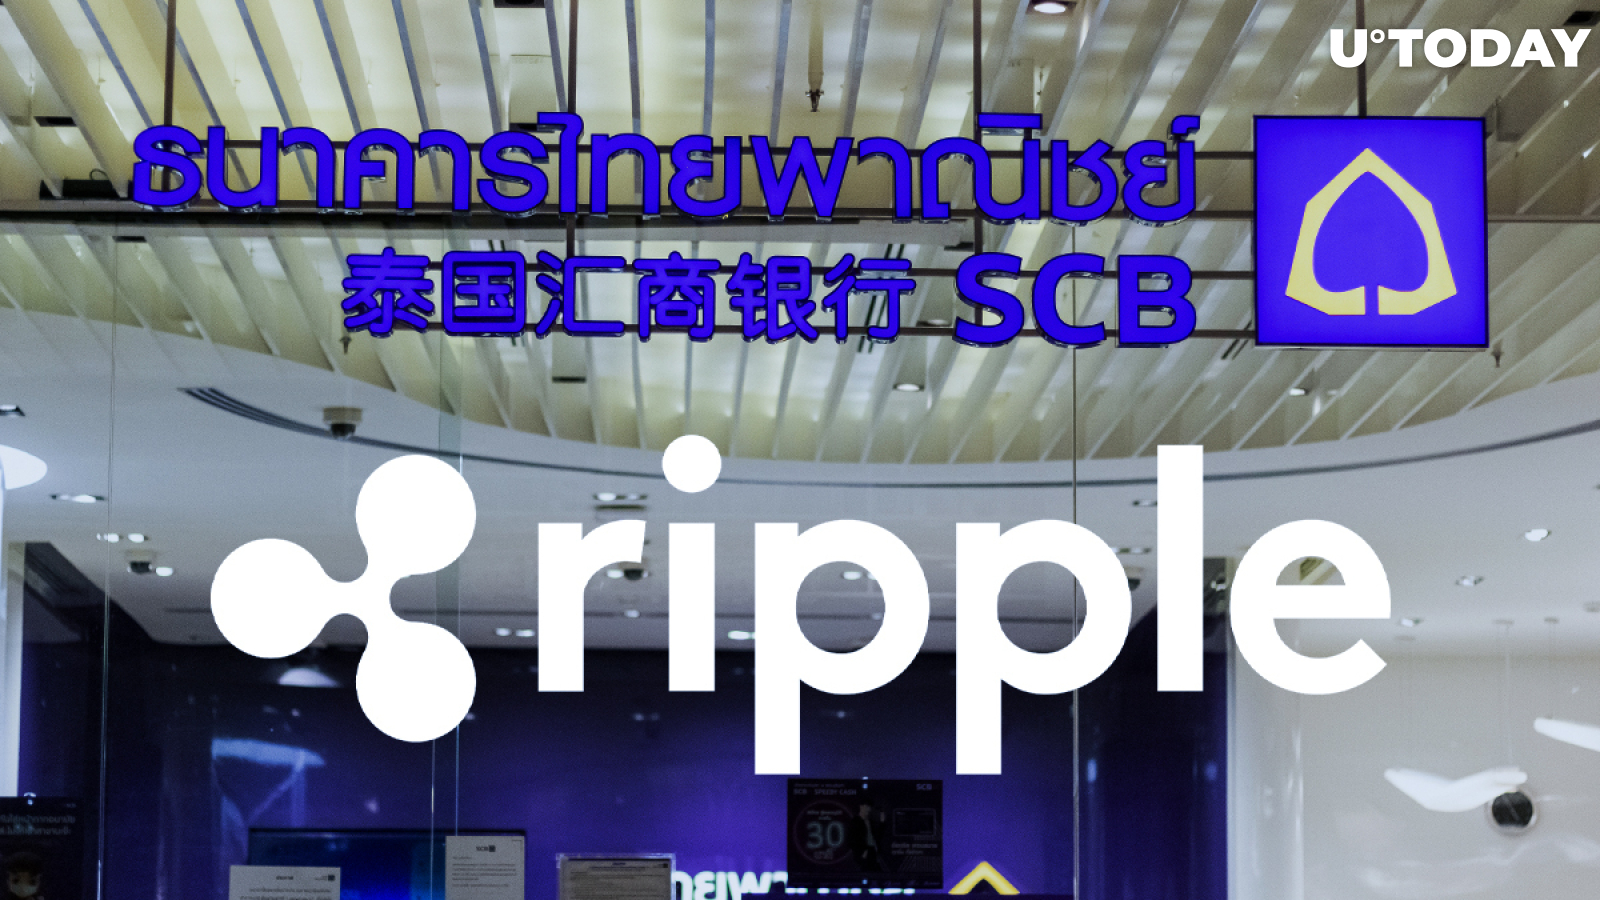 Ripple-Friendly Siam Commercial Bank Collaborates with Top Singapore Blockchain Remittance Firm